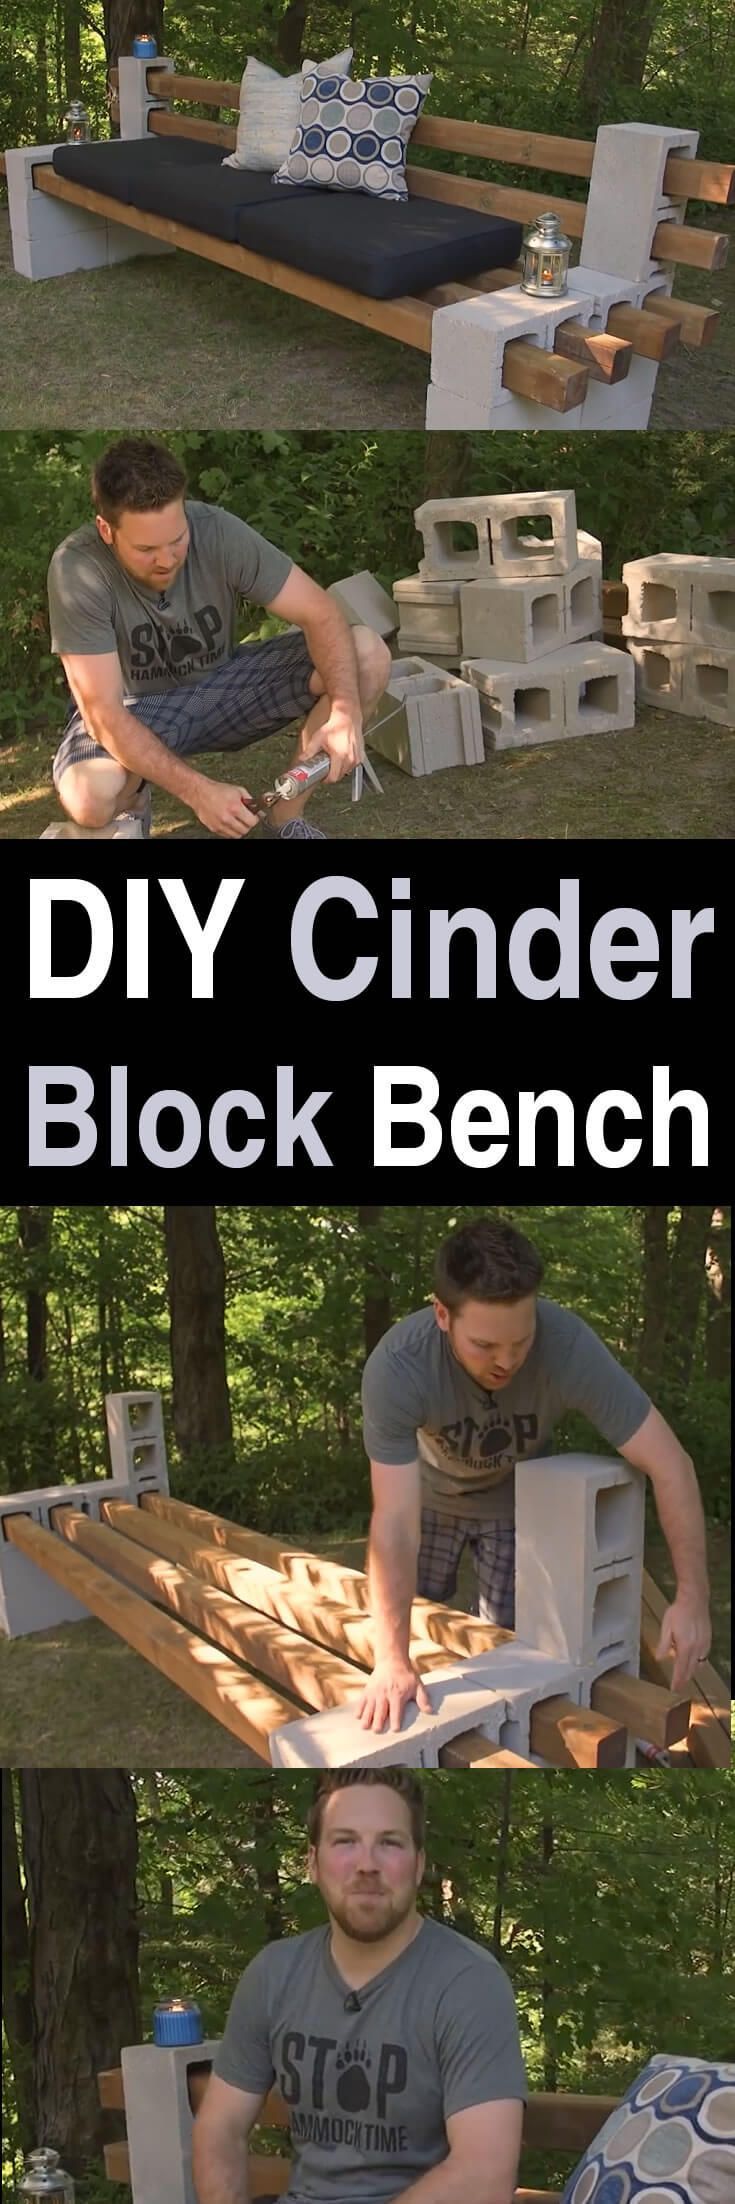 This video is a great example of how many DIY projects are so easy anyone can do it. For this project, all you need are some